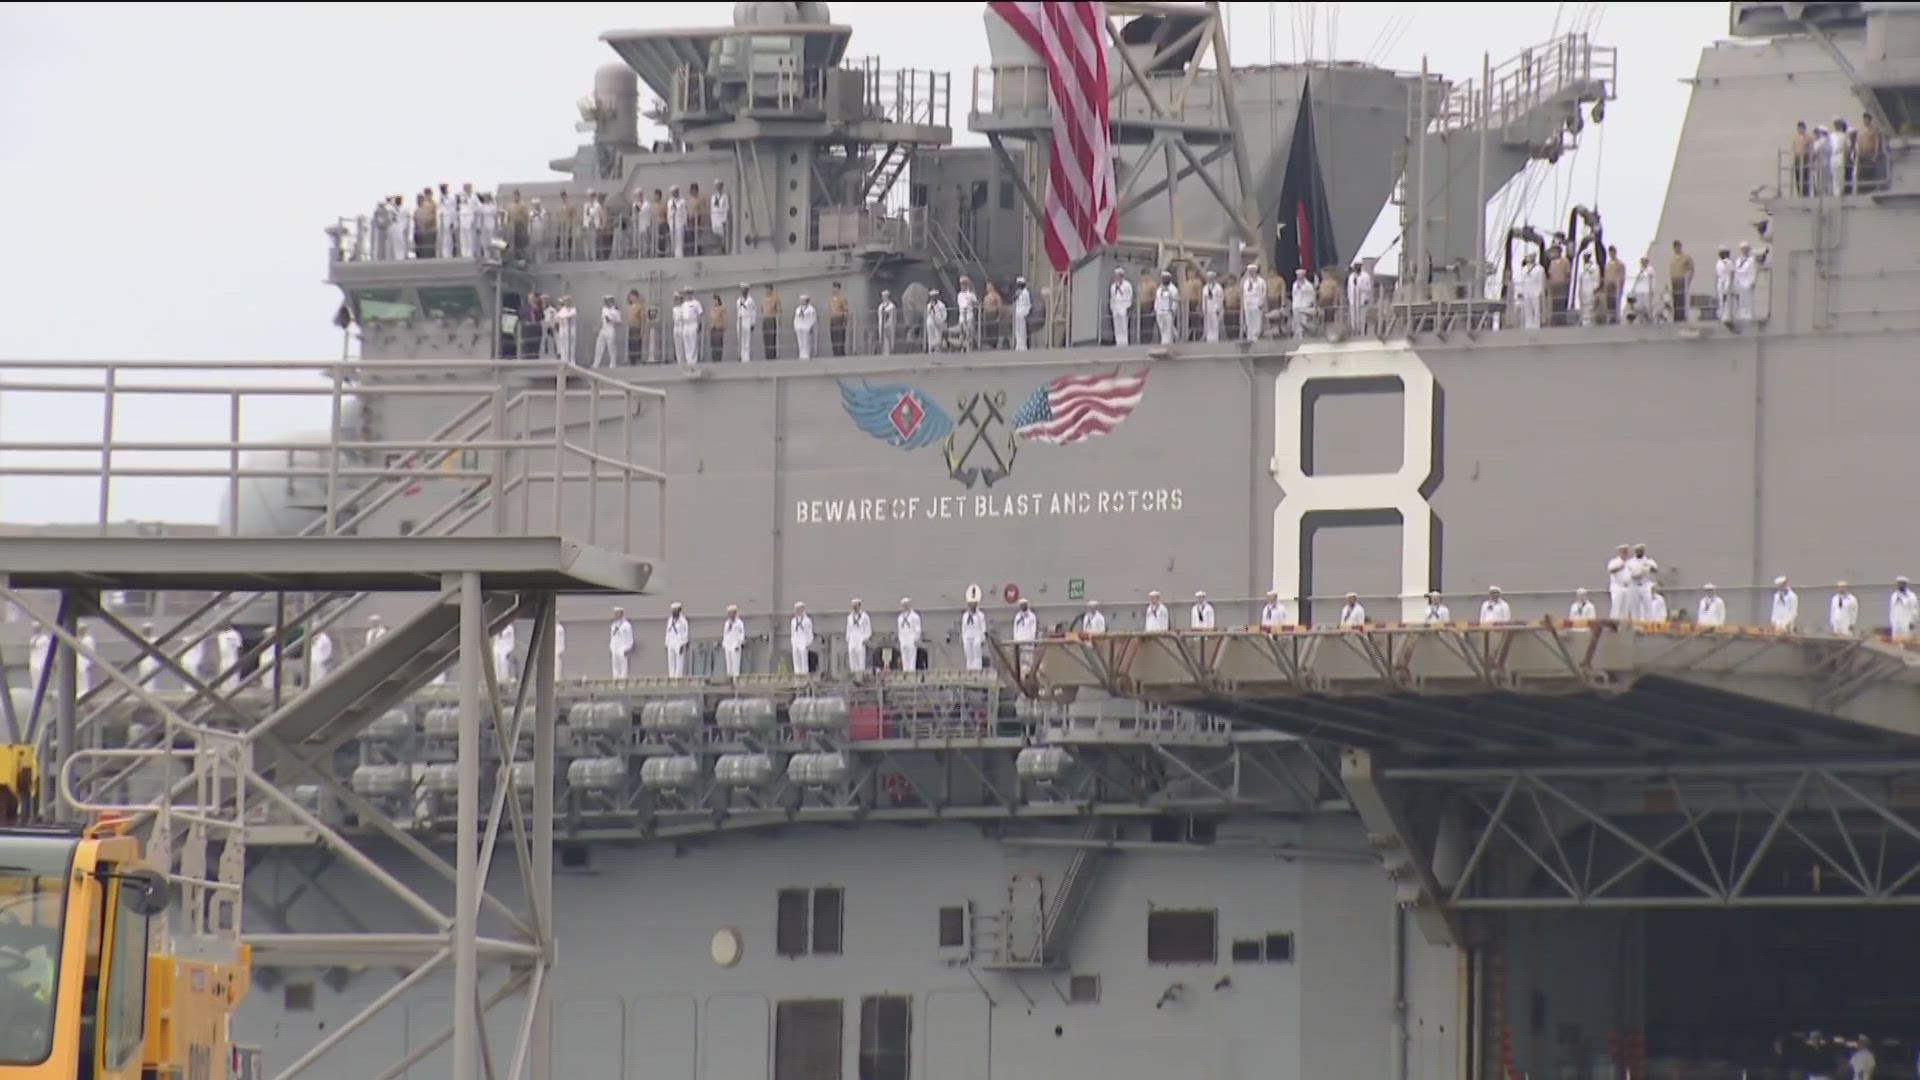 USS Makin Island, USS Anchorage, and USS John P. Murtha returned to San Diego after a 7-month deployment.